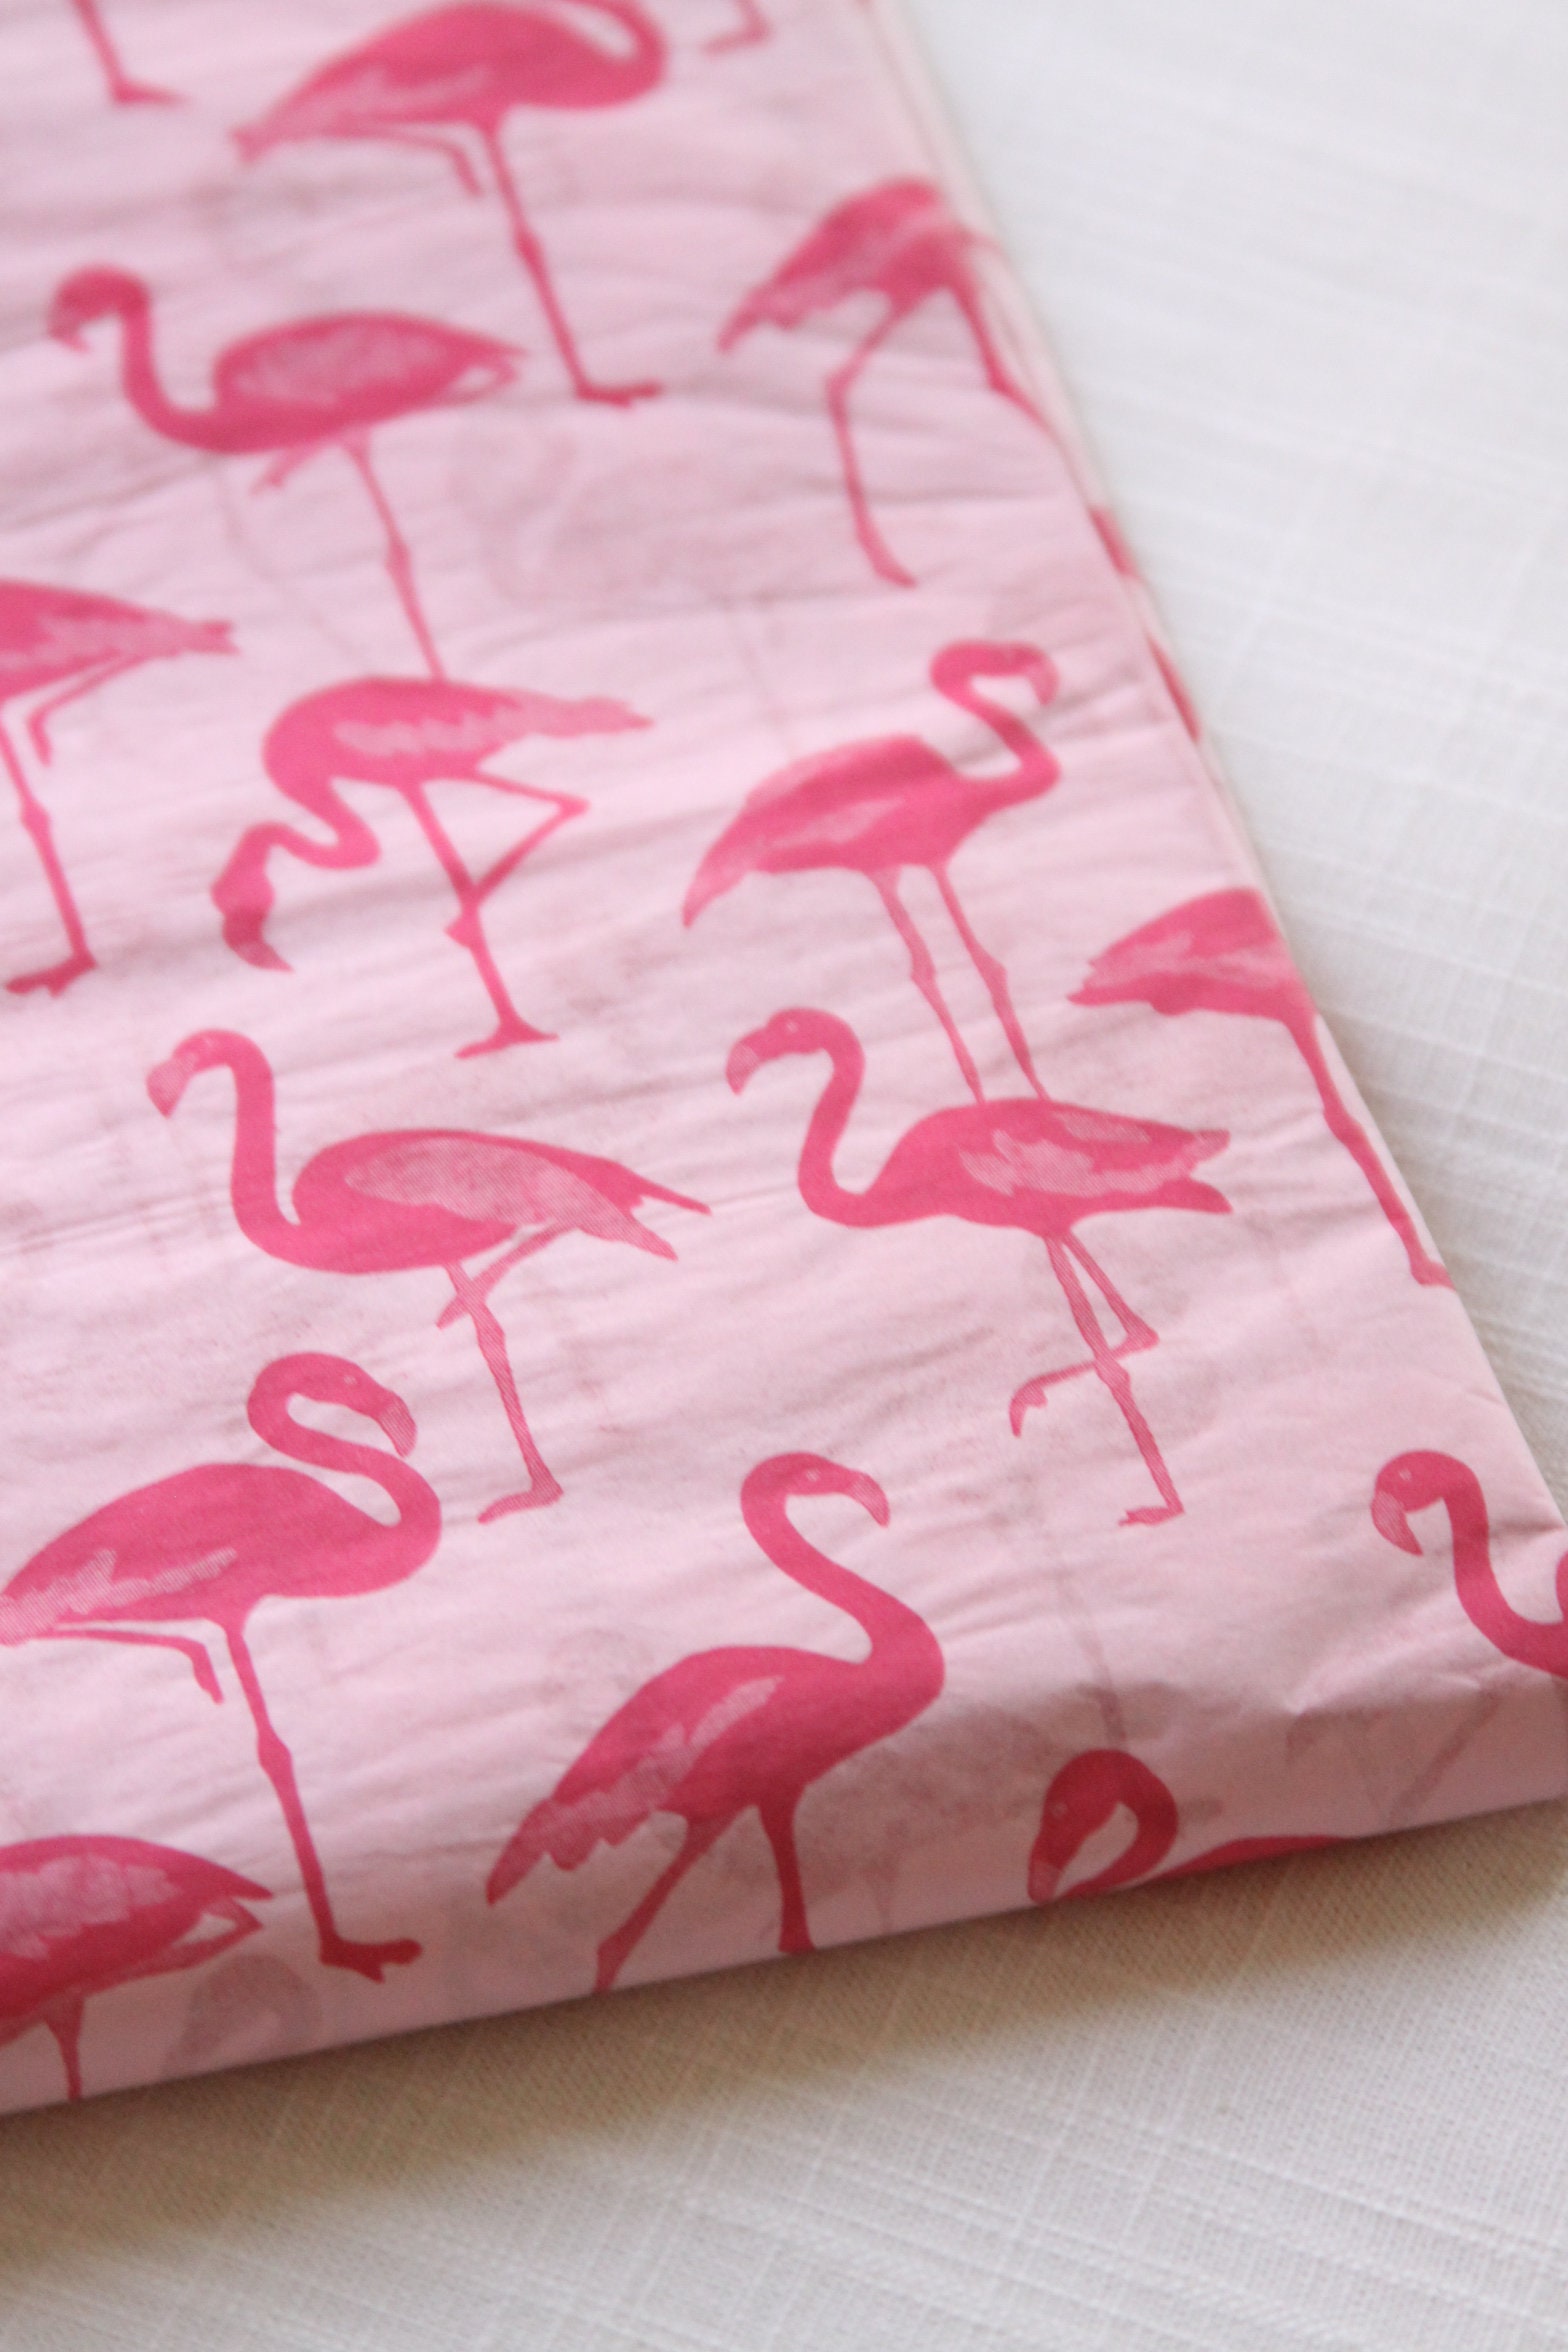 Hot Pink Flamingo Straws: 20 Count – Olive it Boutique